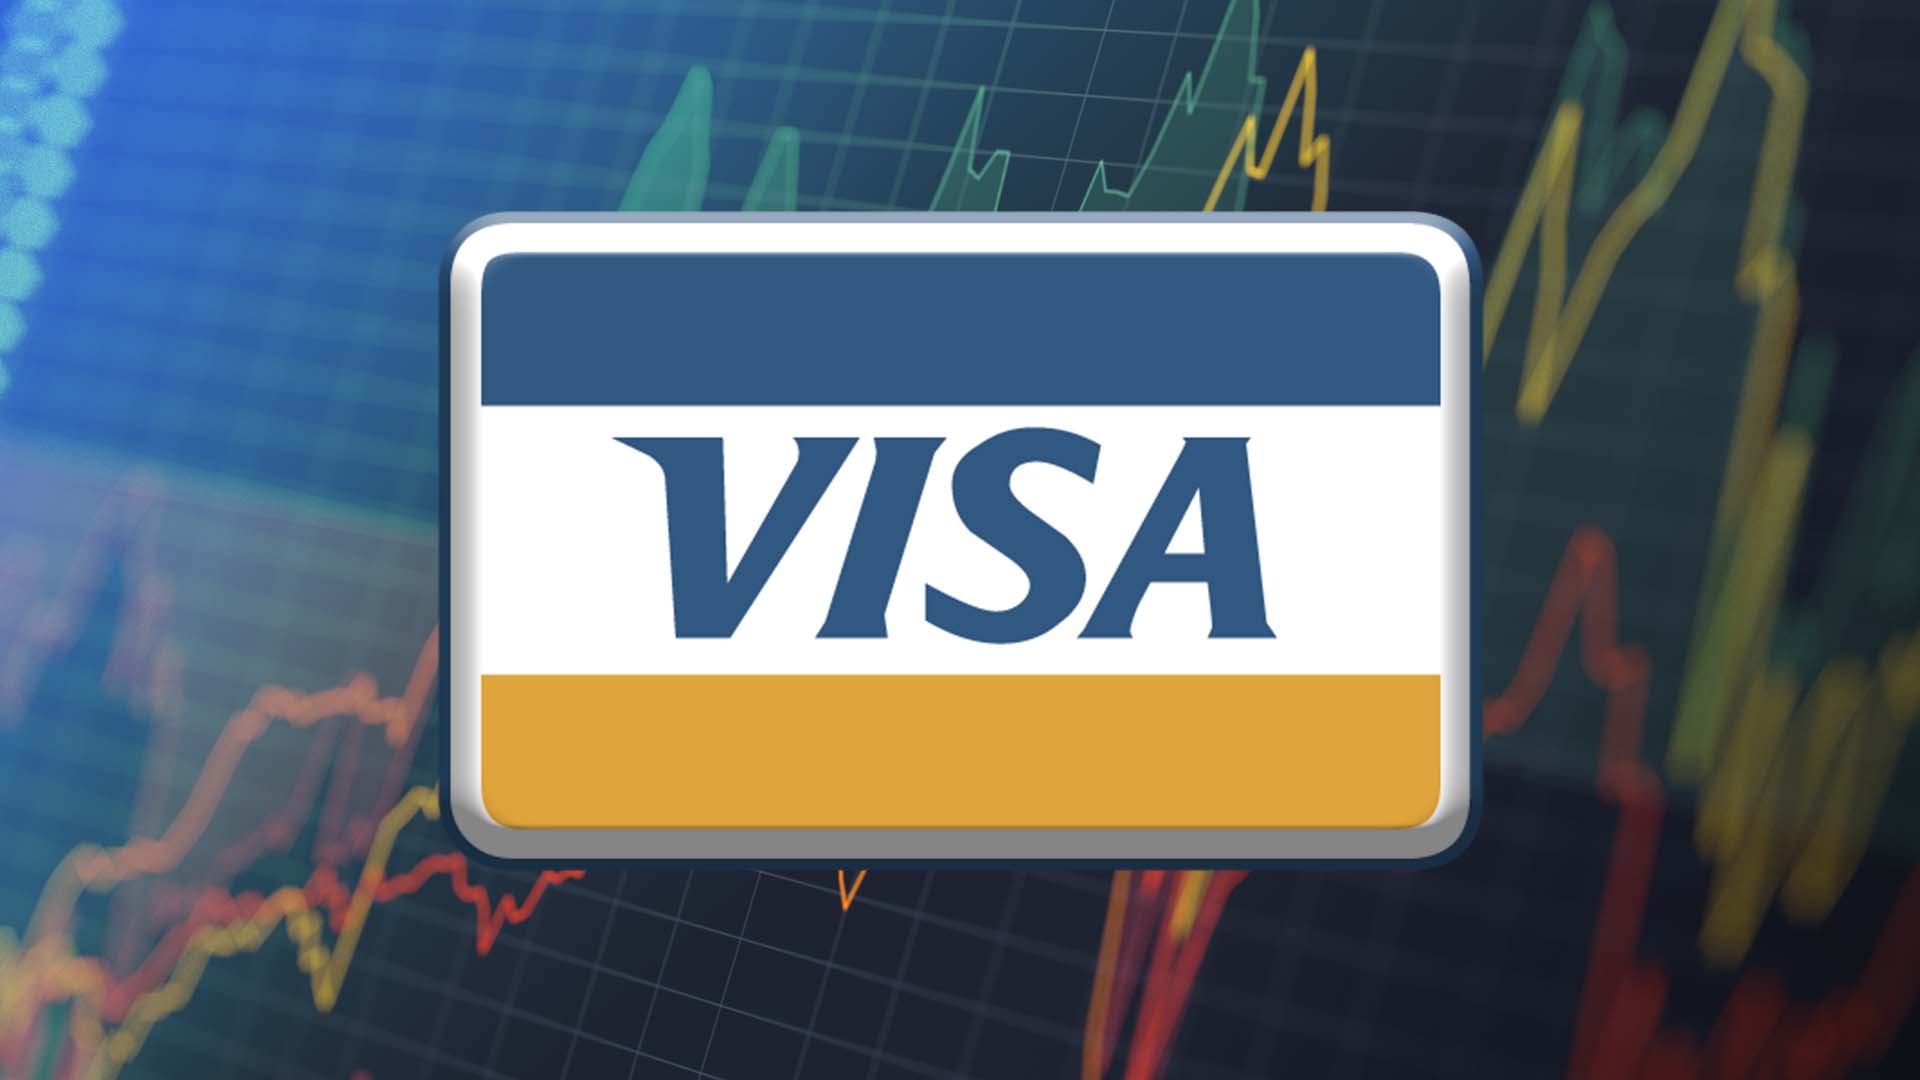 Visa Stock Price Prediction: VISA Winds up Global Credit Agreement with FTX, Still Asset Looks Good for Investment